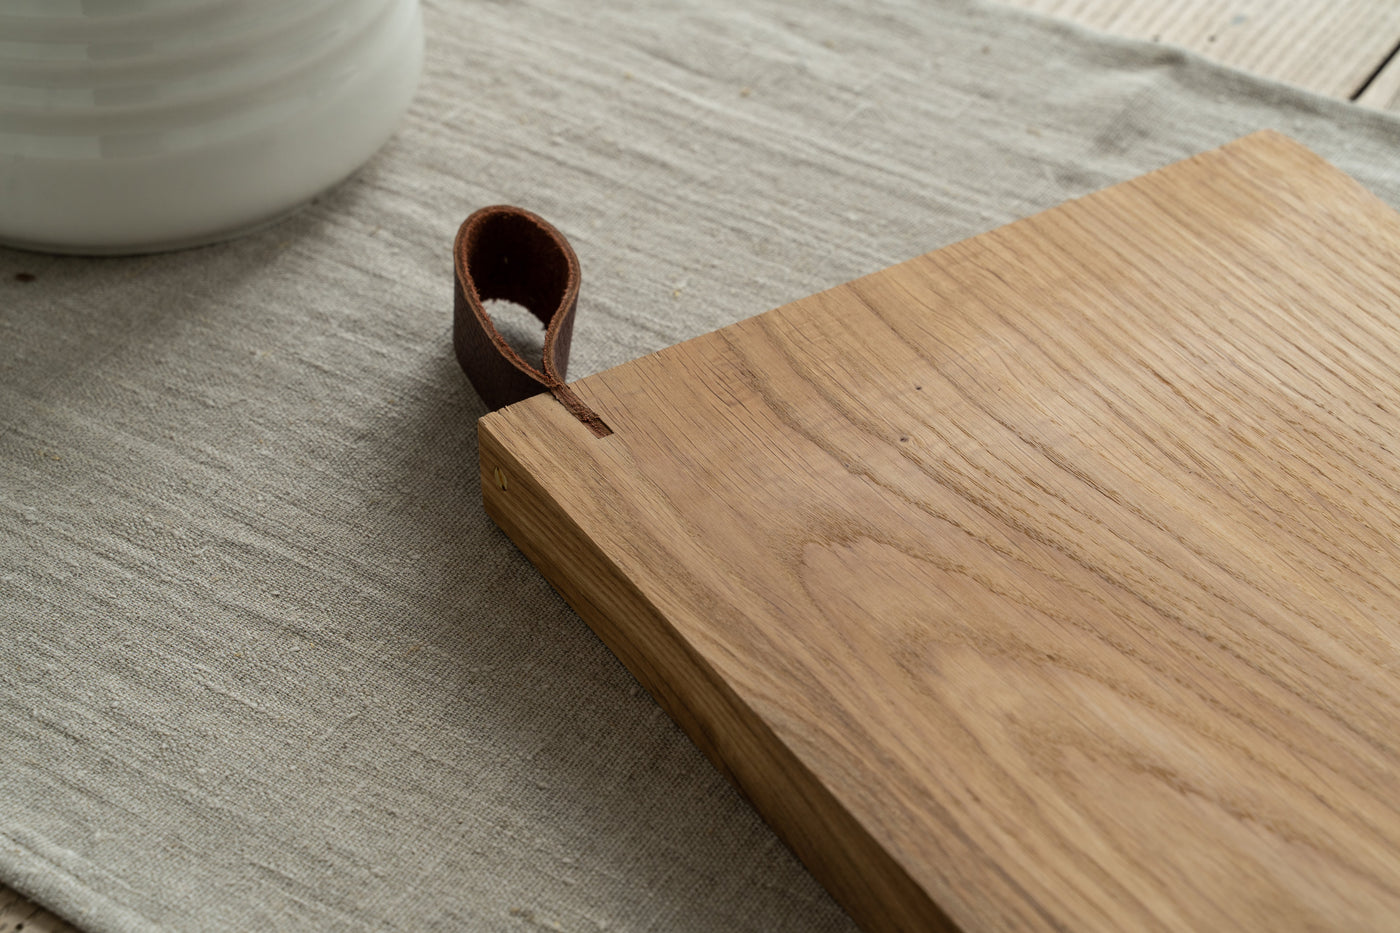 Mediea Mini Oak Cutting Board-Cooking and Eating-COOKING/SERVING TOOLS, TABLEWARE, TRAYS / BOARDS-Forest Homes-Nature inspired decor-Nature decor